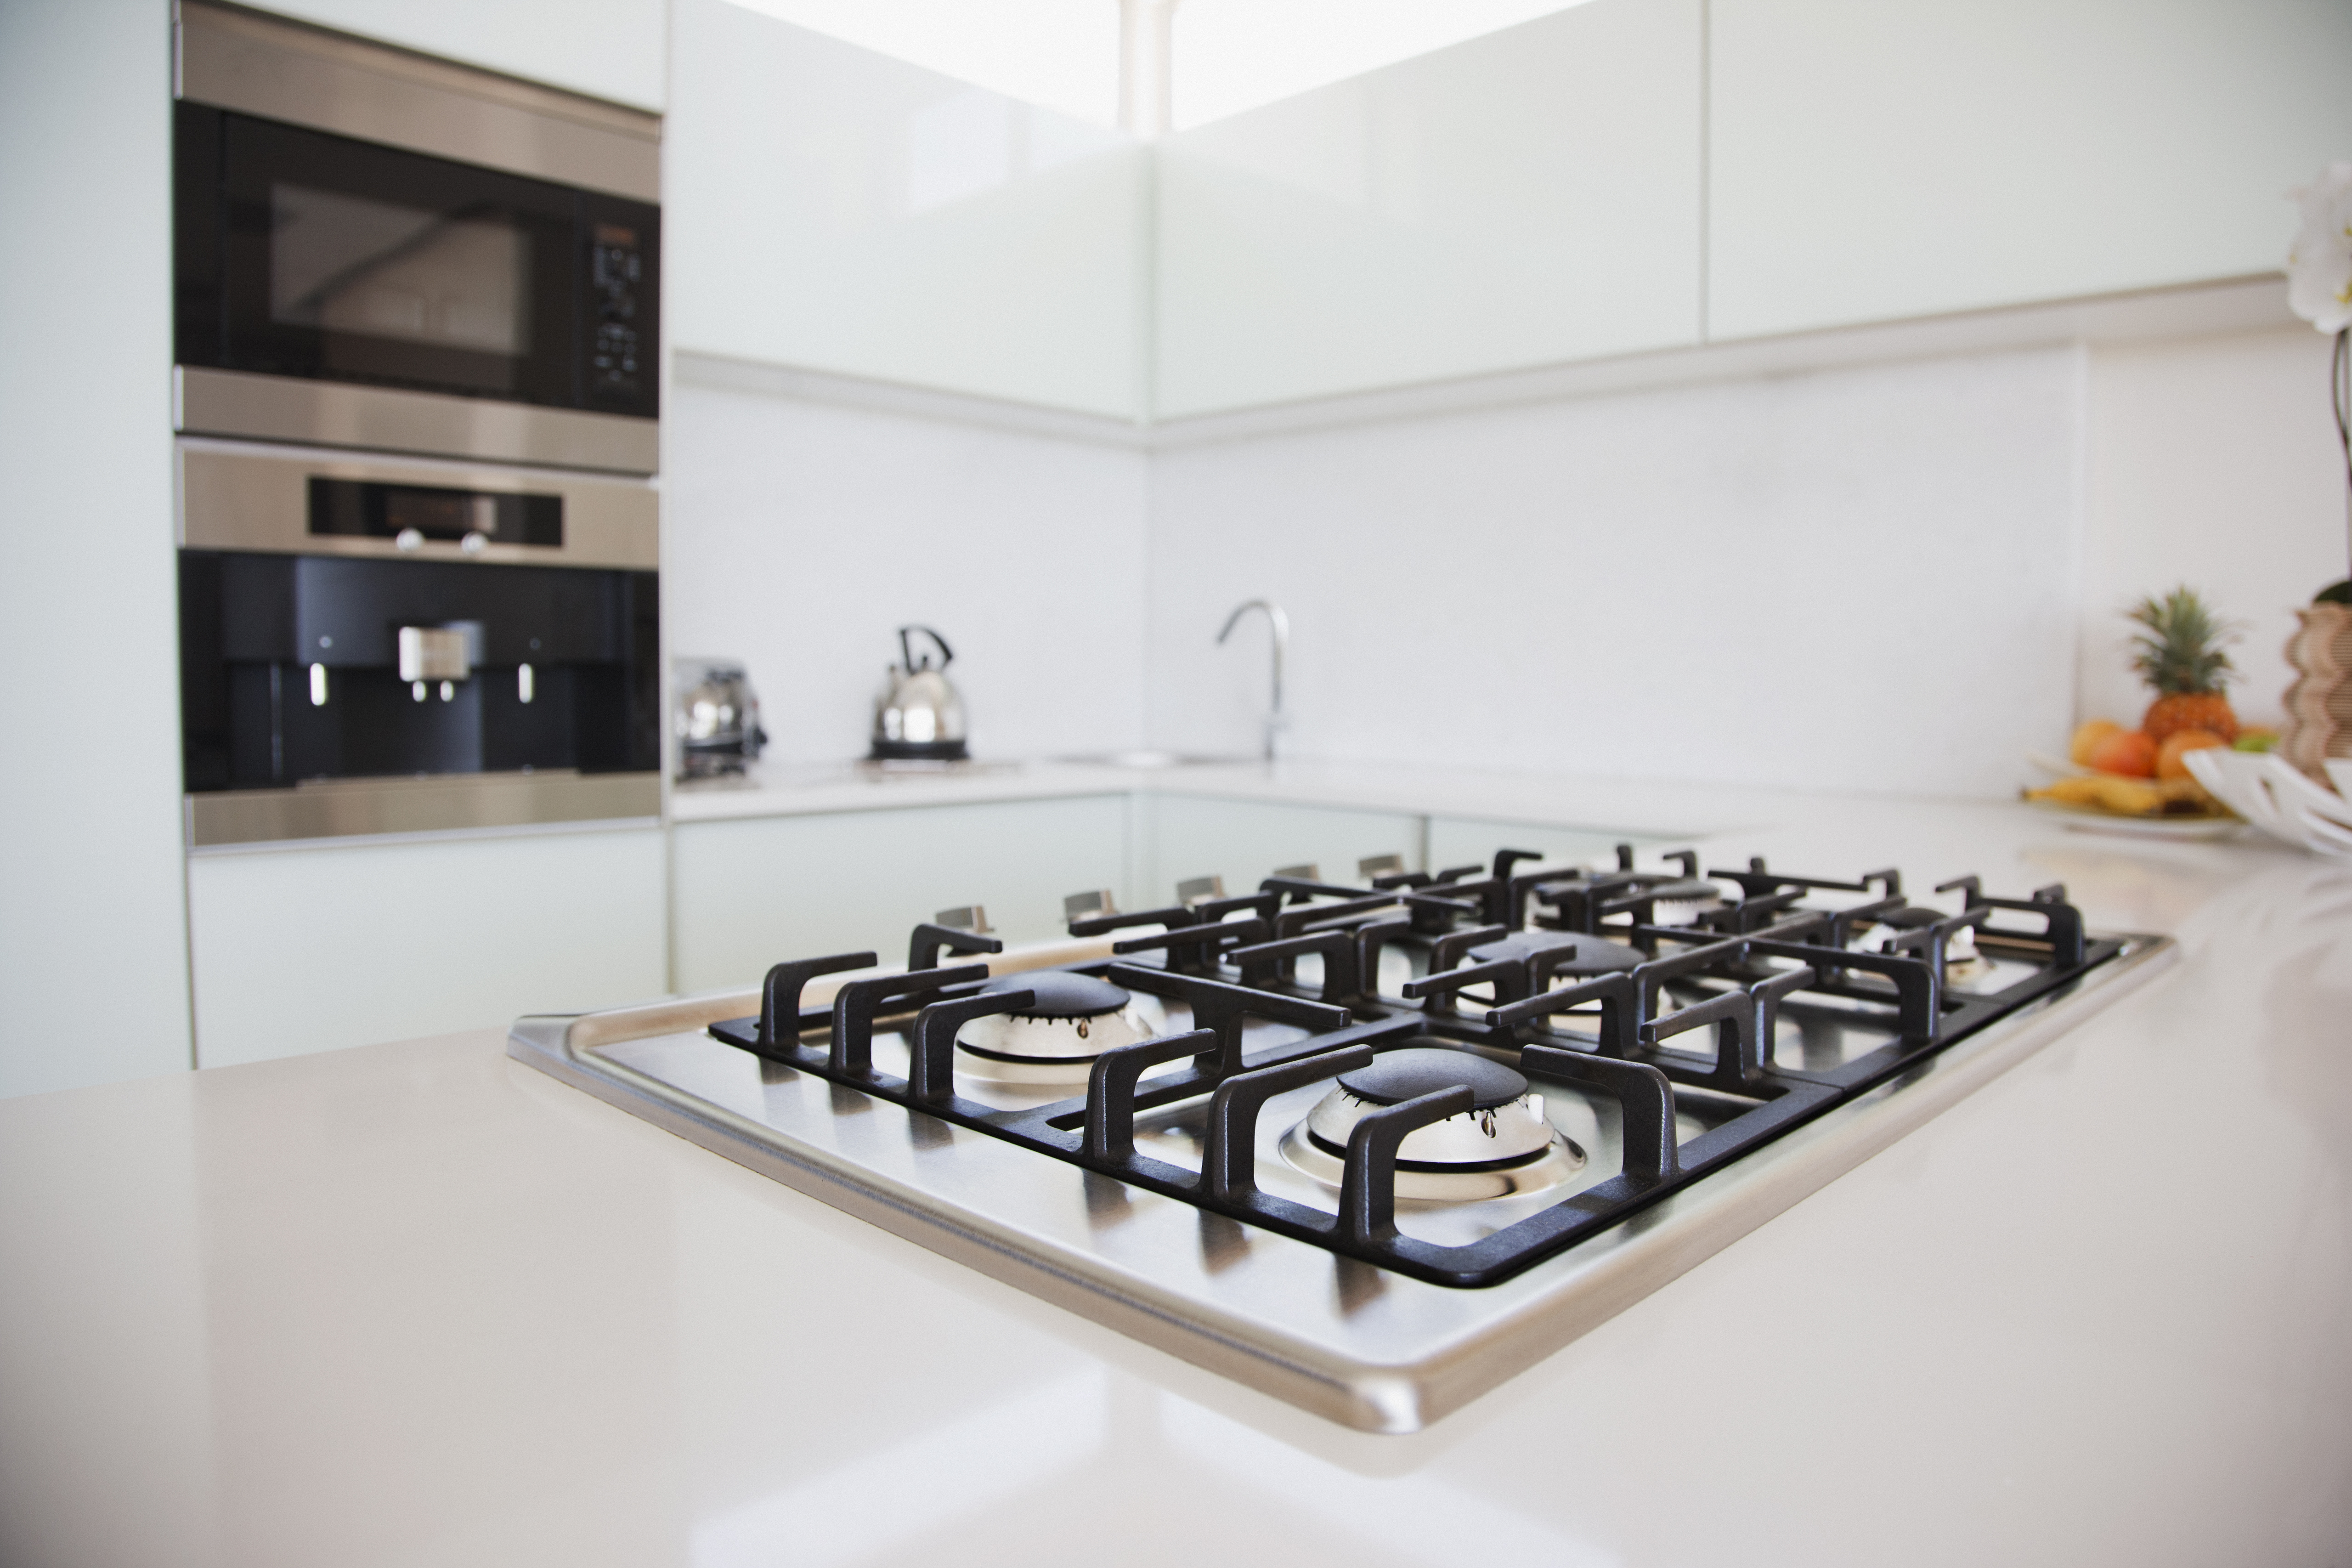 Your Gas Stove May Be Leaking Benzene Into Your Kitchen